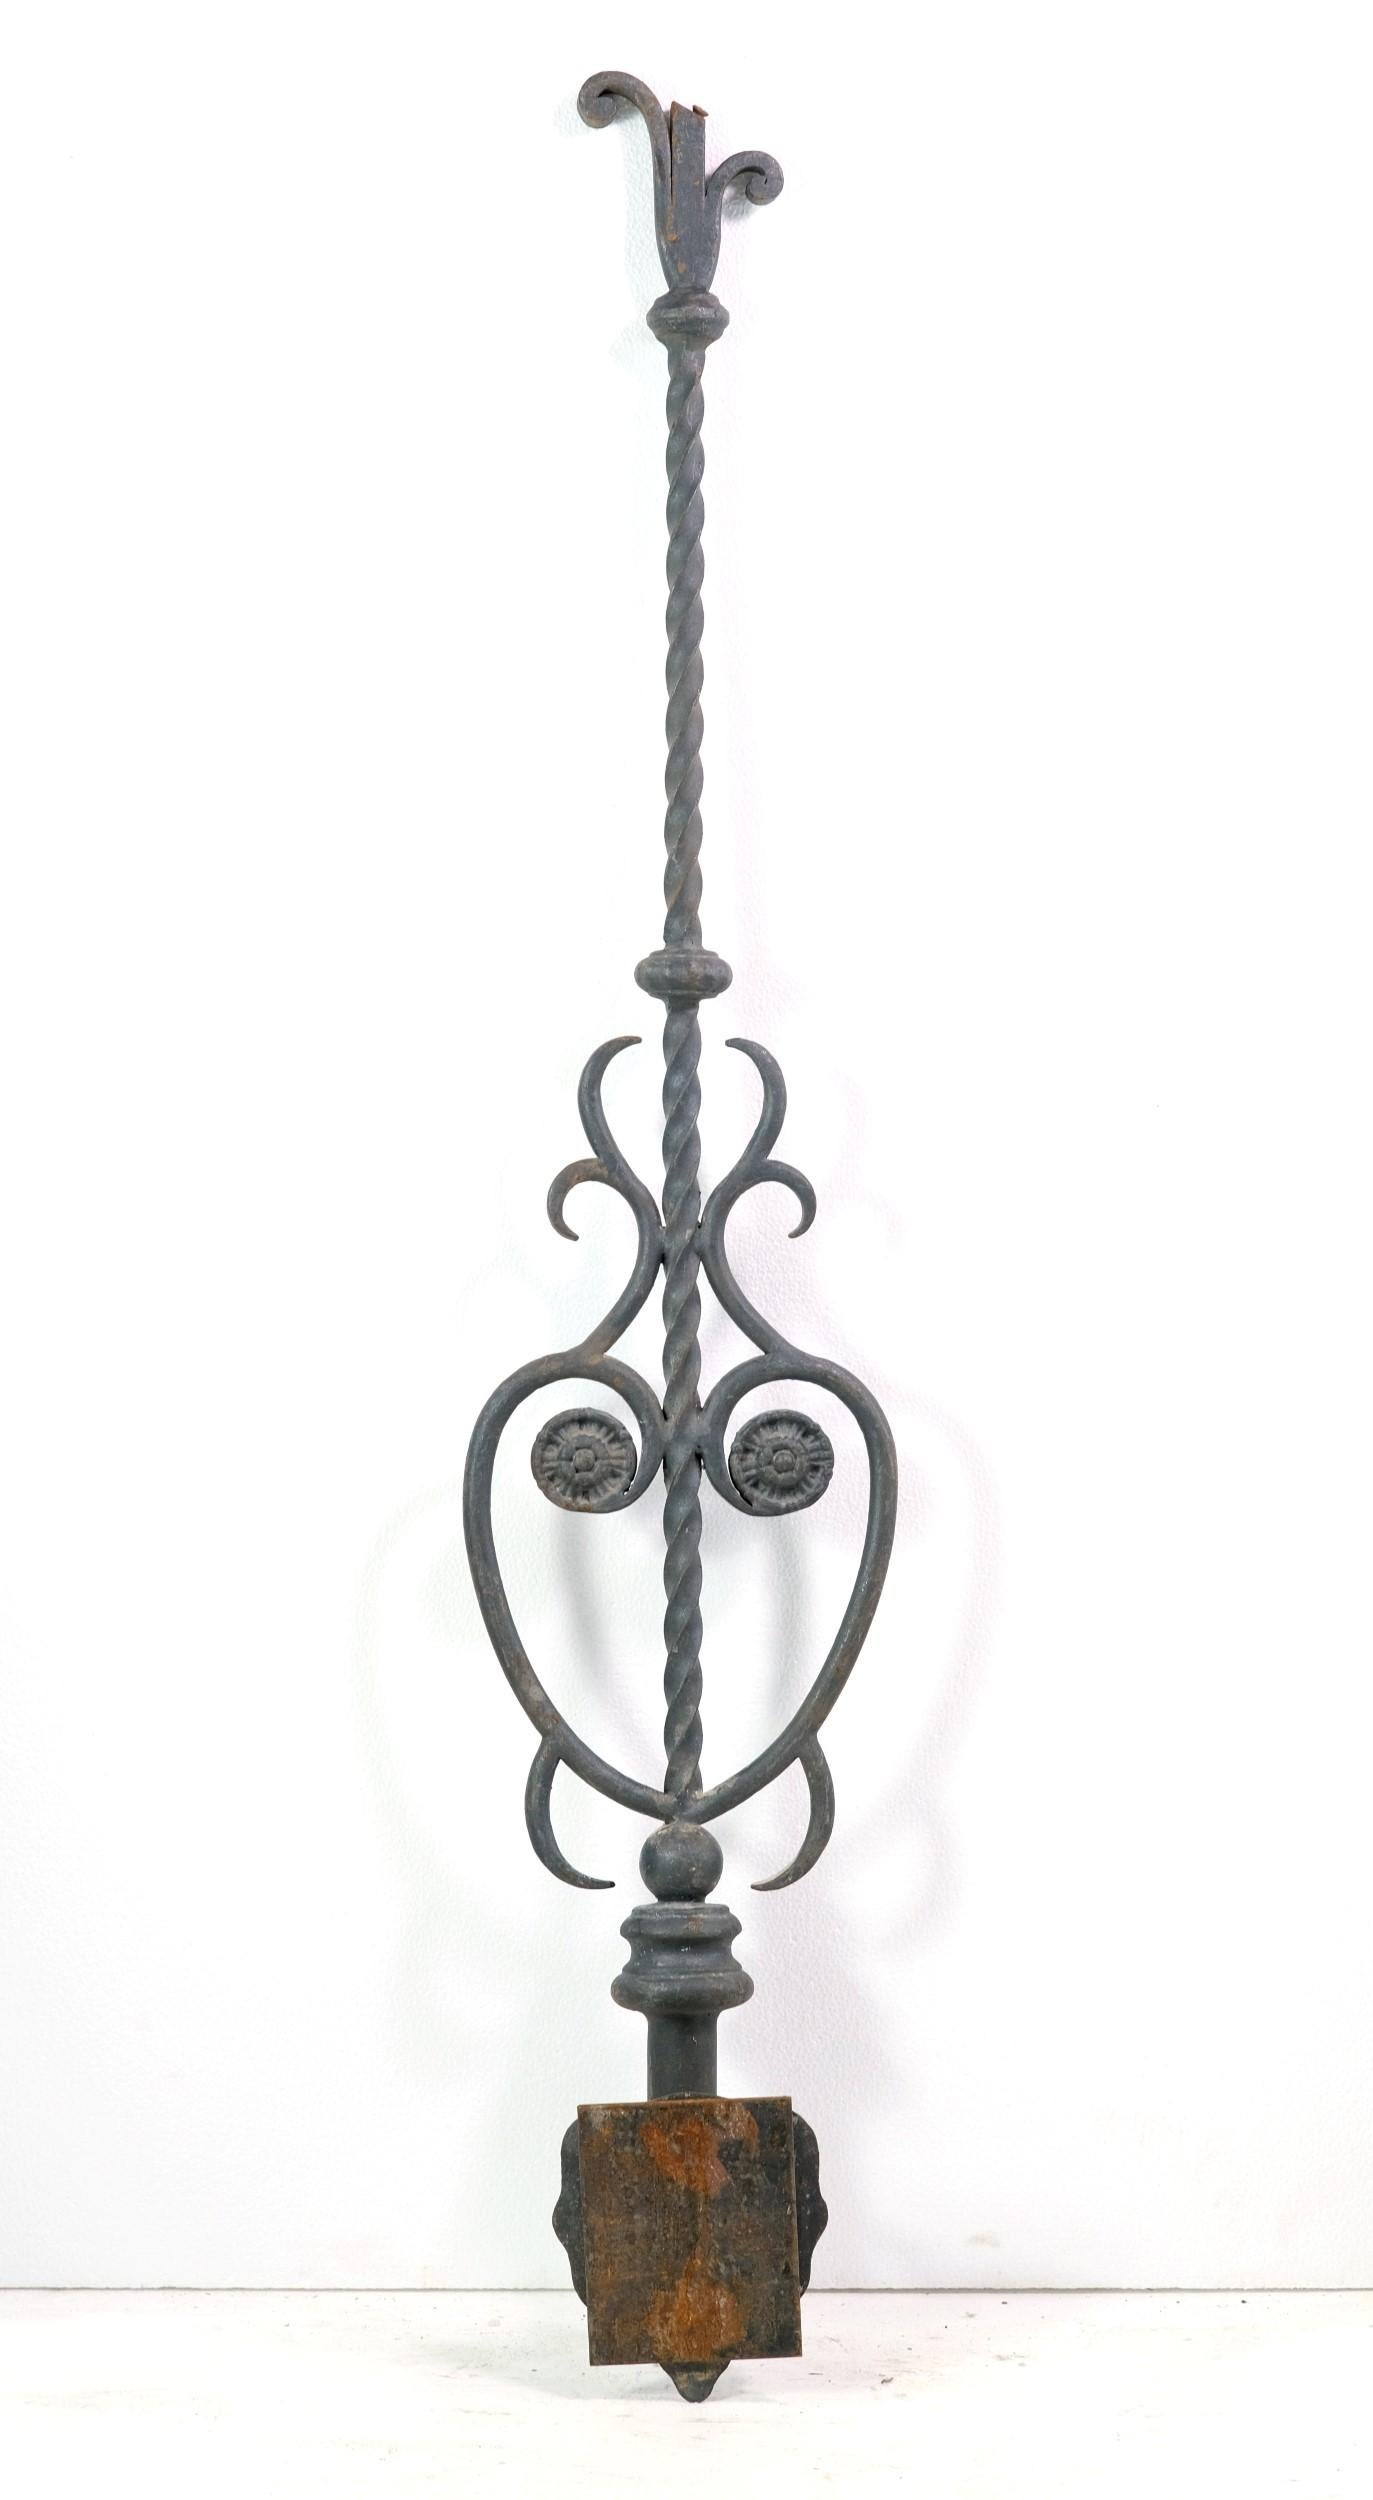 19th Century 19th C. Ornate Wrought Iron Balustrade Floral Details Stair Rail 44 In. 